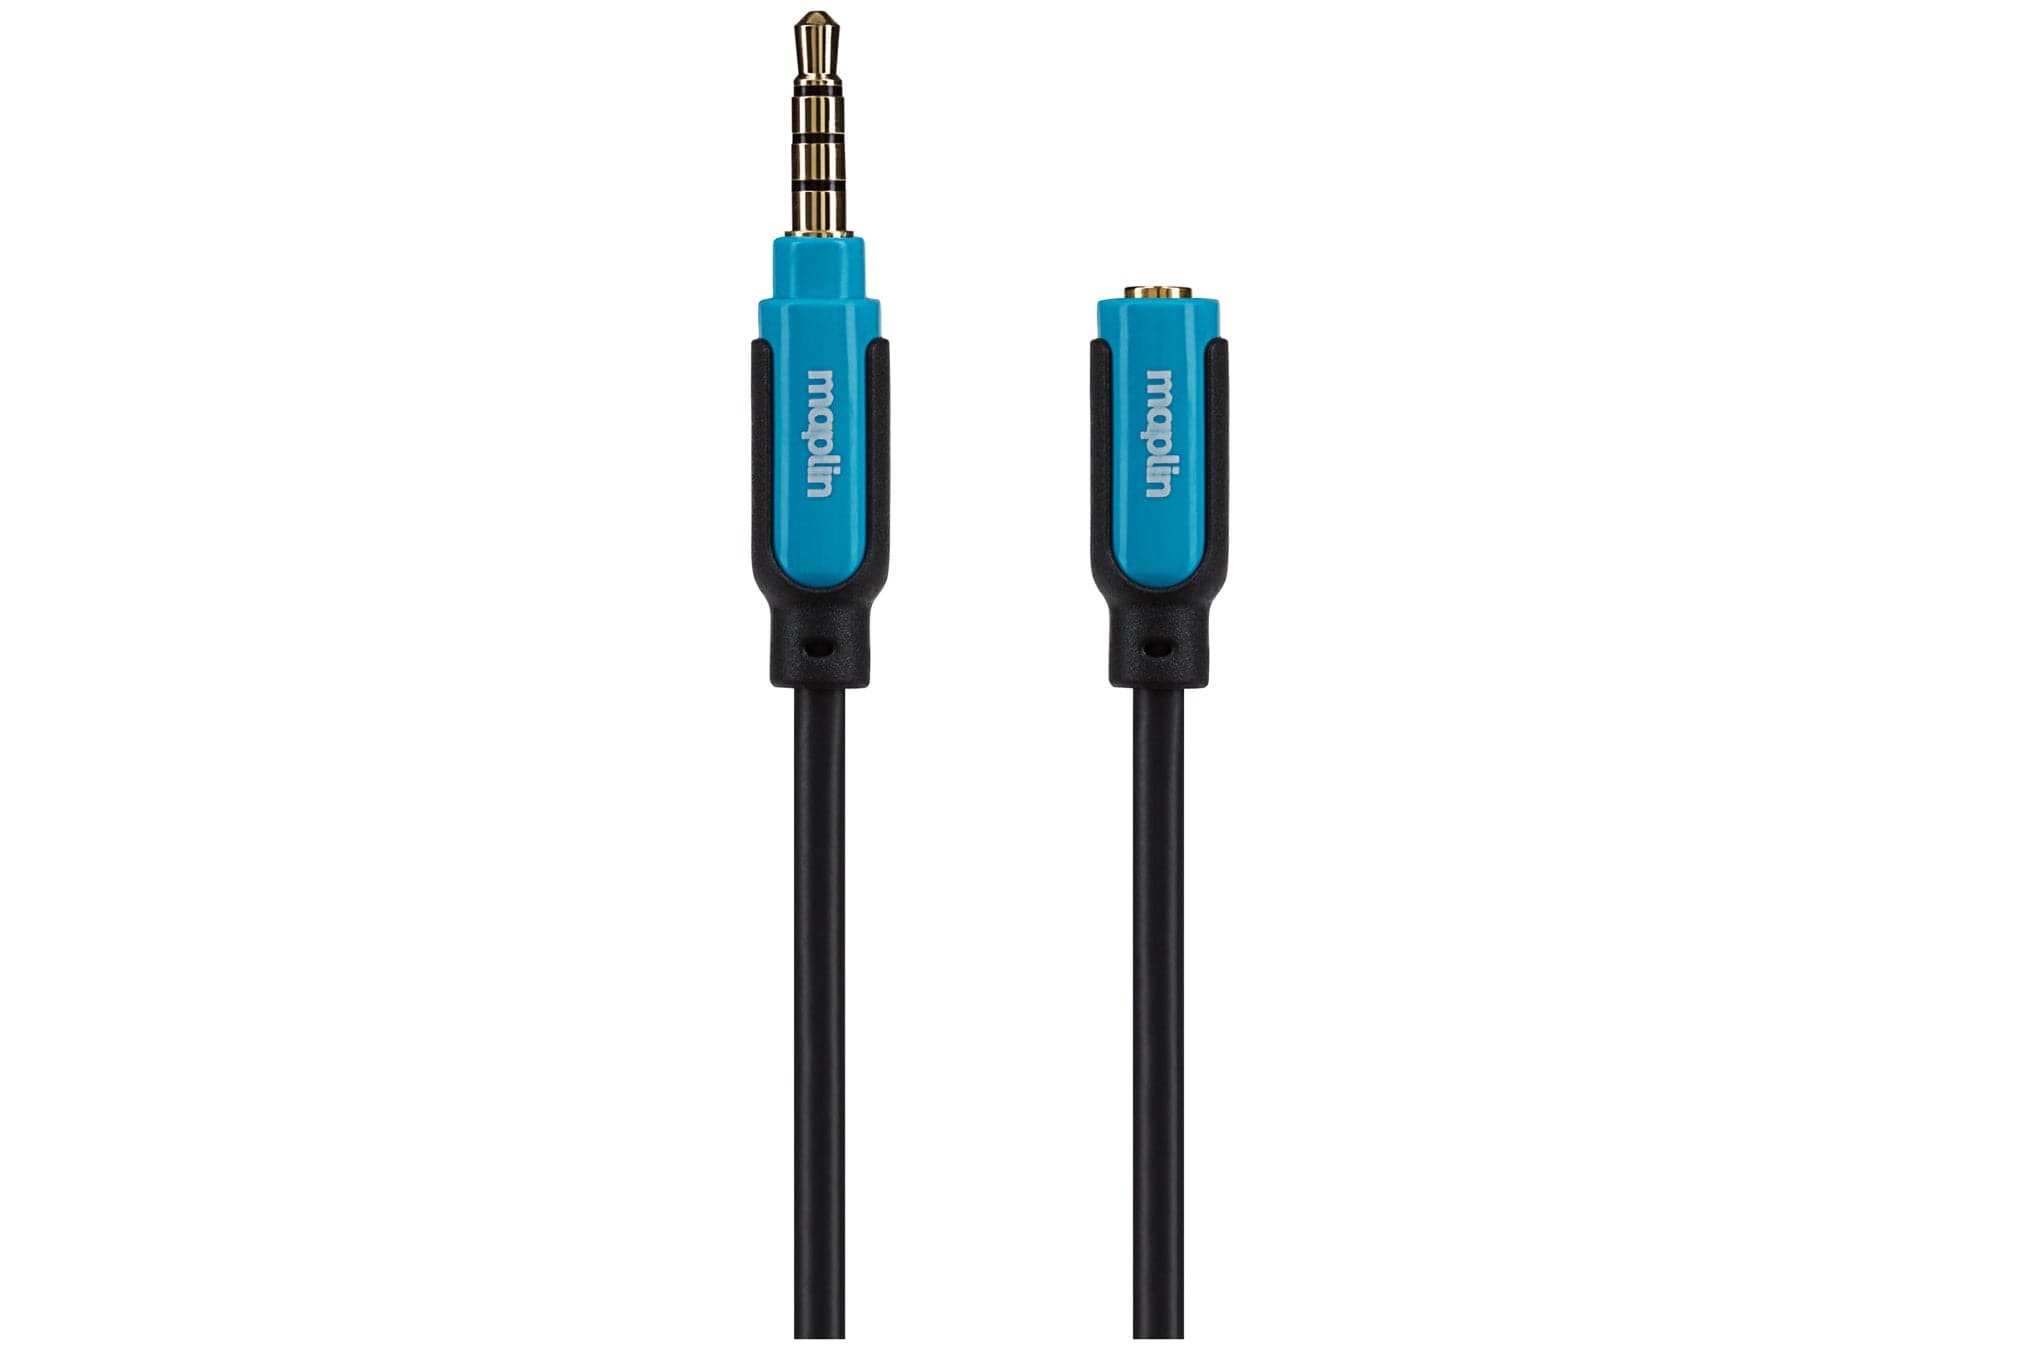 Maplin 3.5mm Aux Stereo 4-Pole Jack Plug to 3.5mm Female Jack Extension Cable - Black, 3m